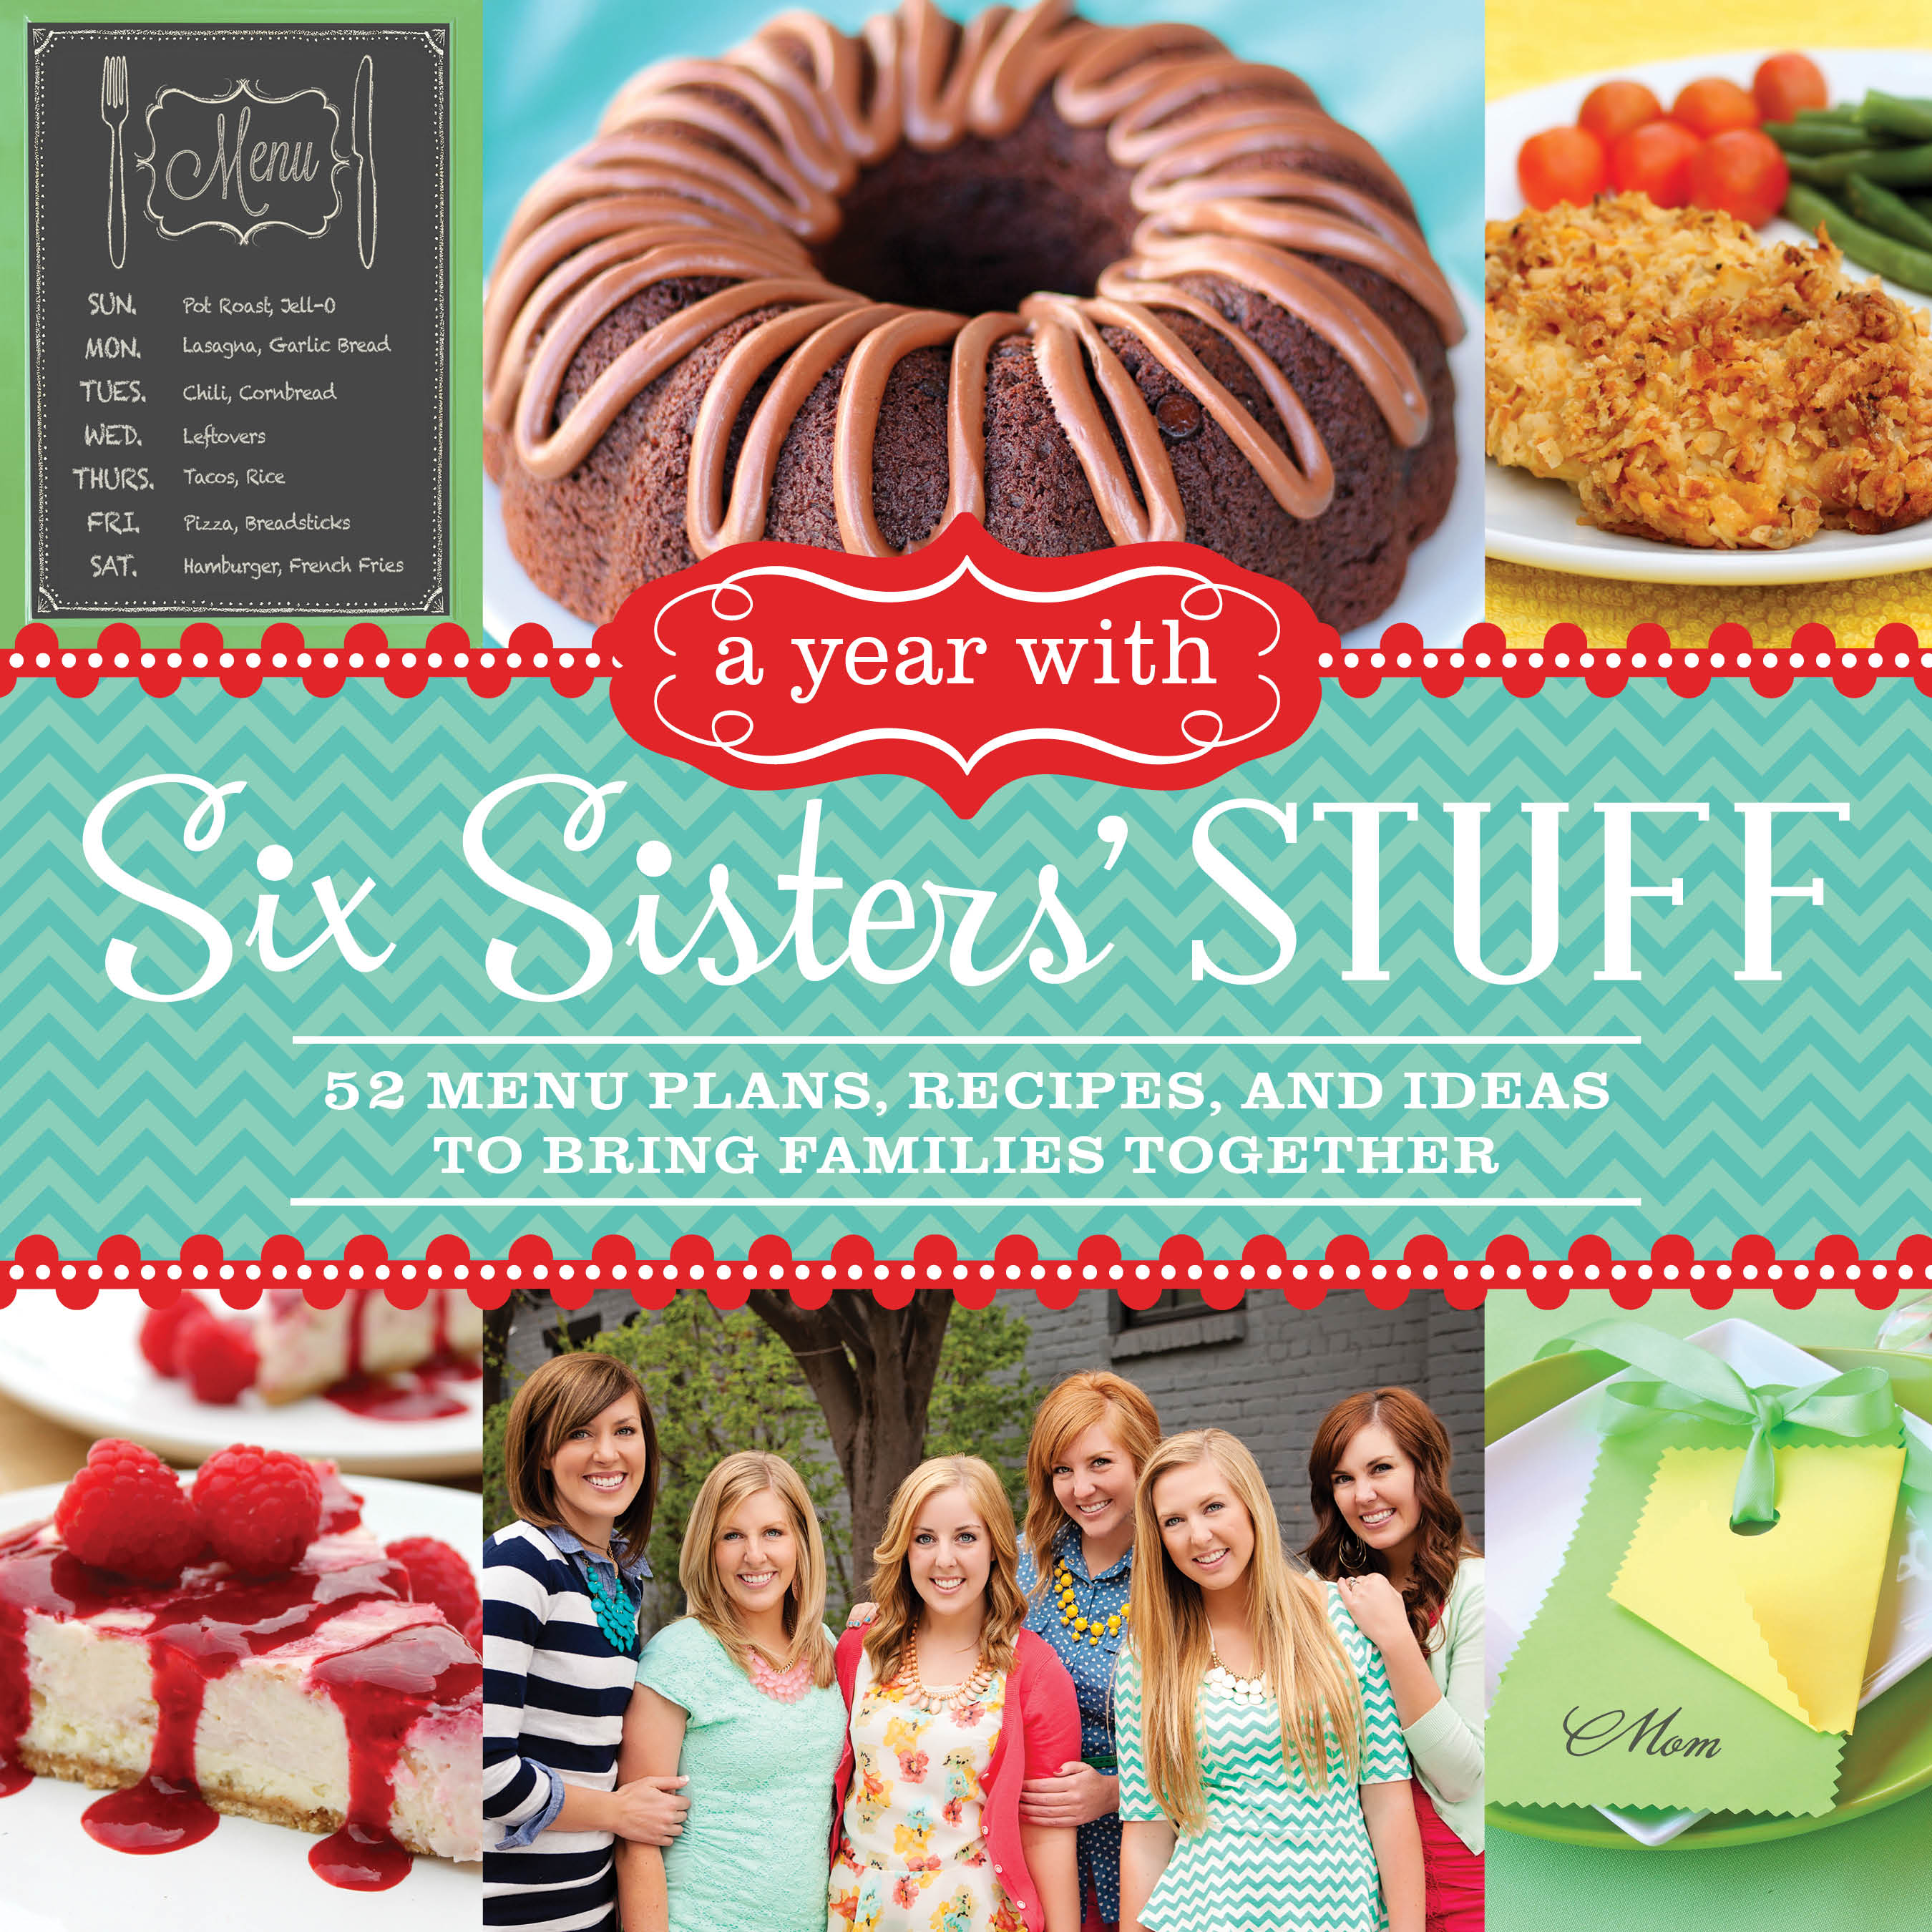 A Year With Six Sisters’ Stuff  ~ Blog Tour, Review and Giveaway